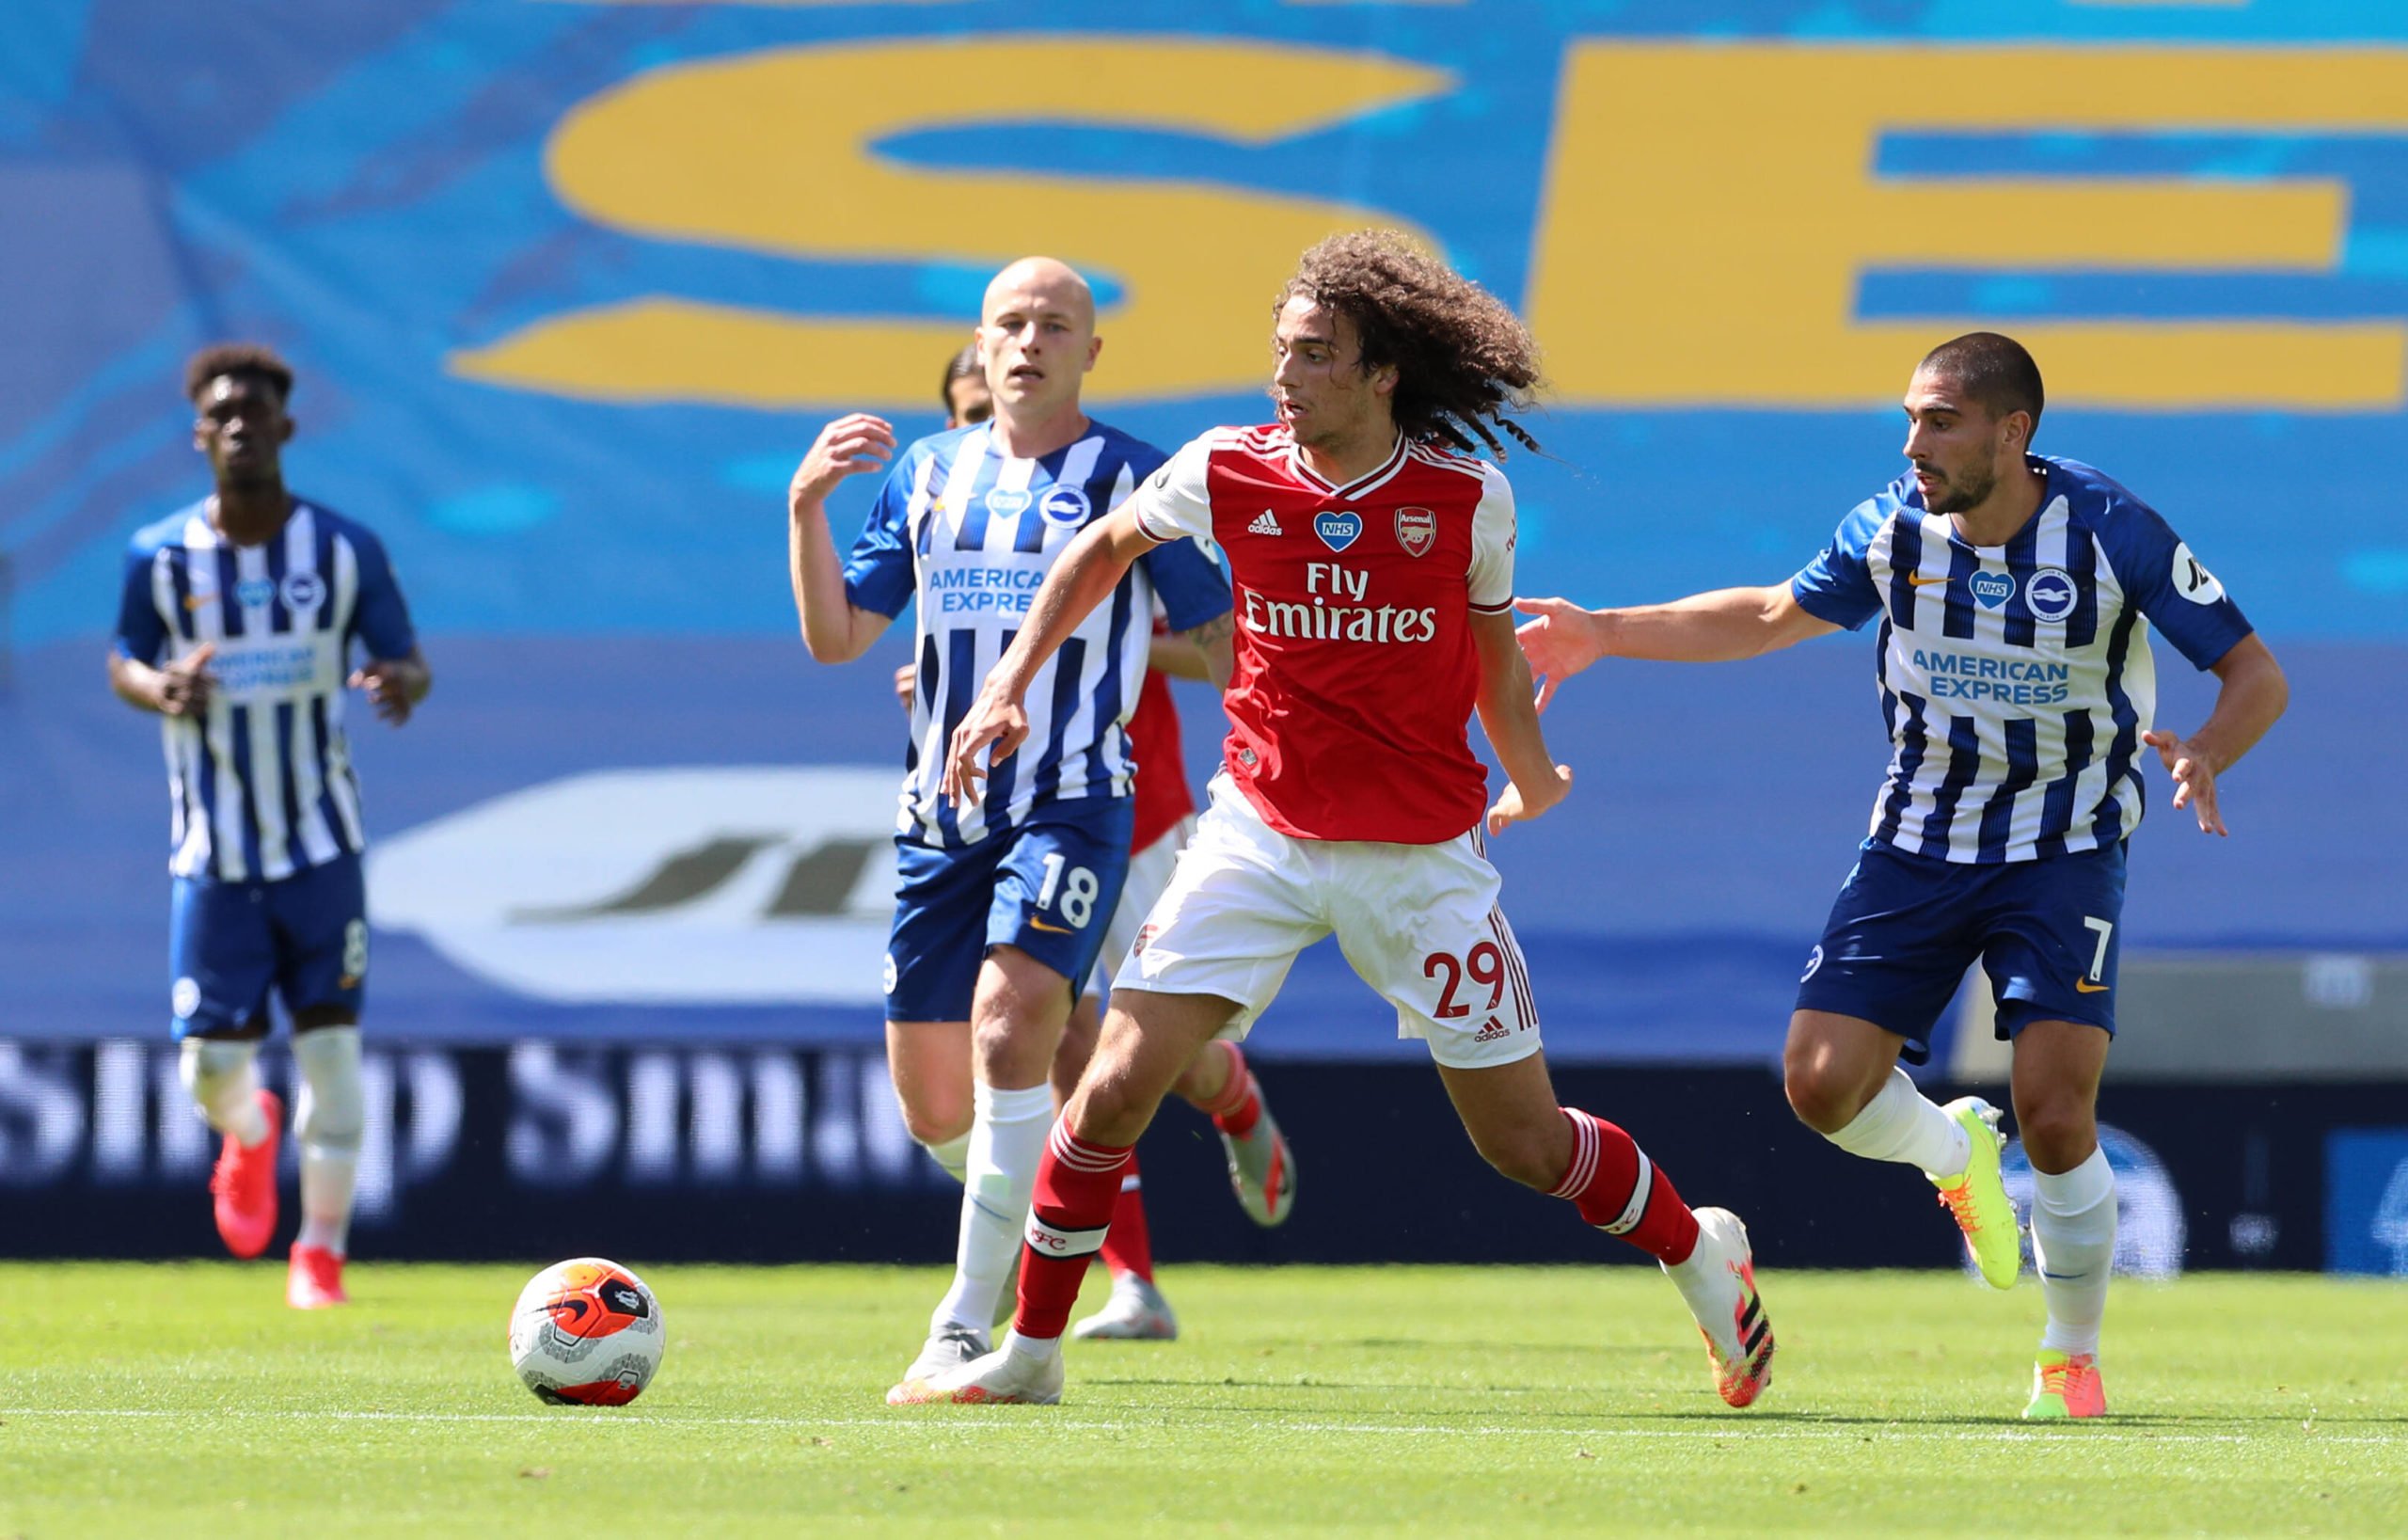 Arsenal's Guendouzi gathering interest of European clubs (Guendouzi is seen in the photo)